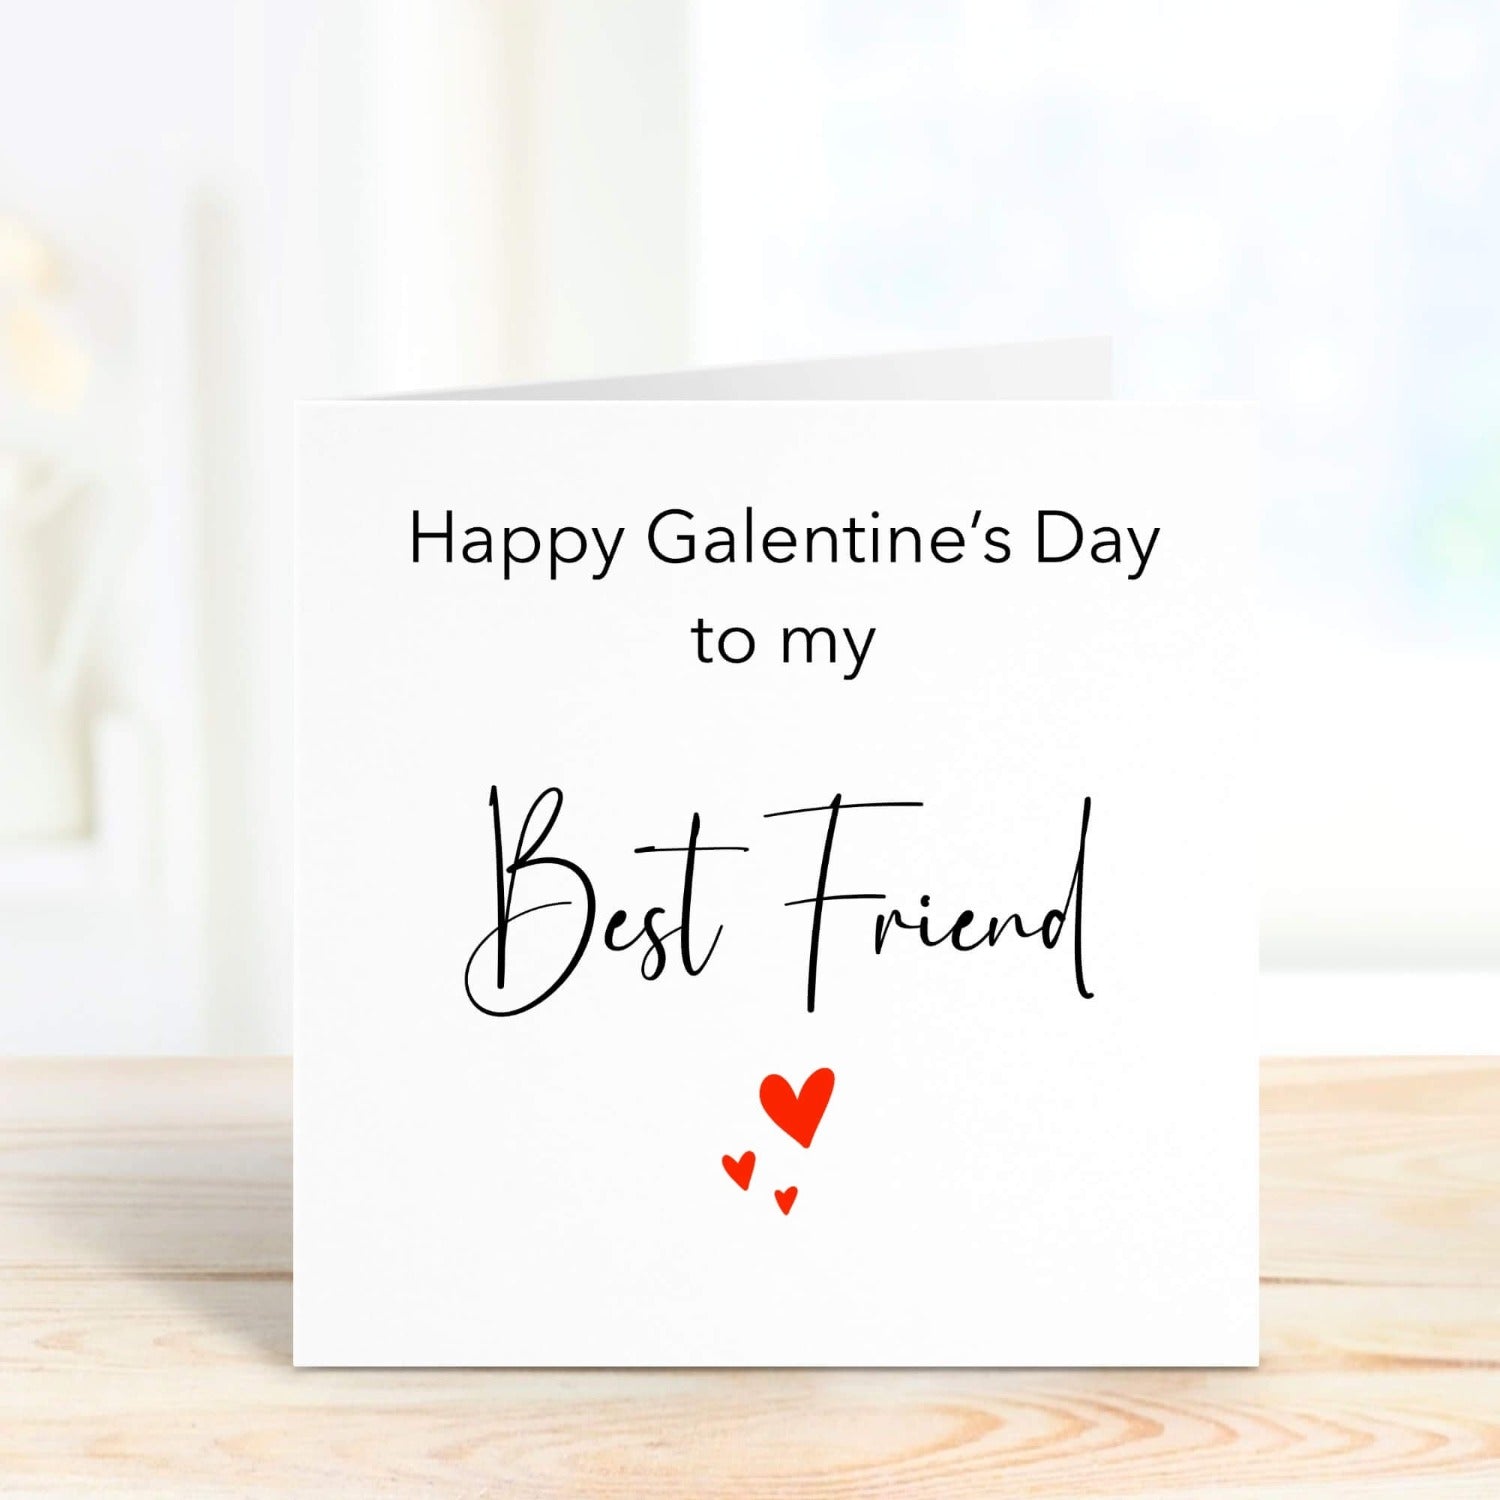 best friend personalised card happy galentine's day card